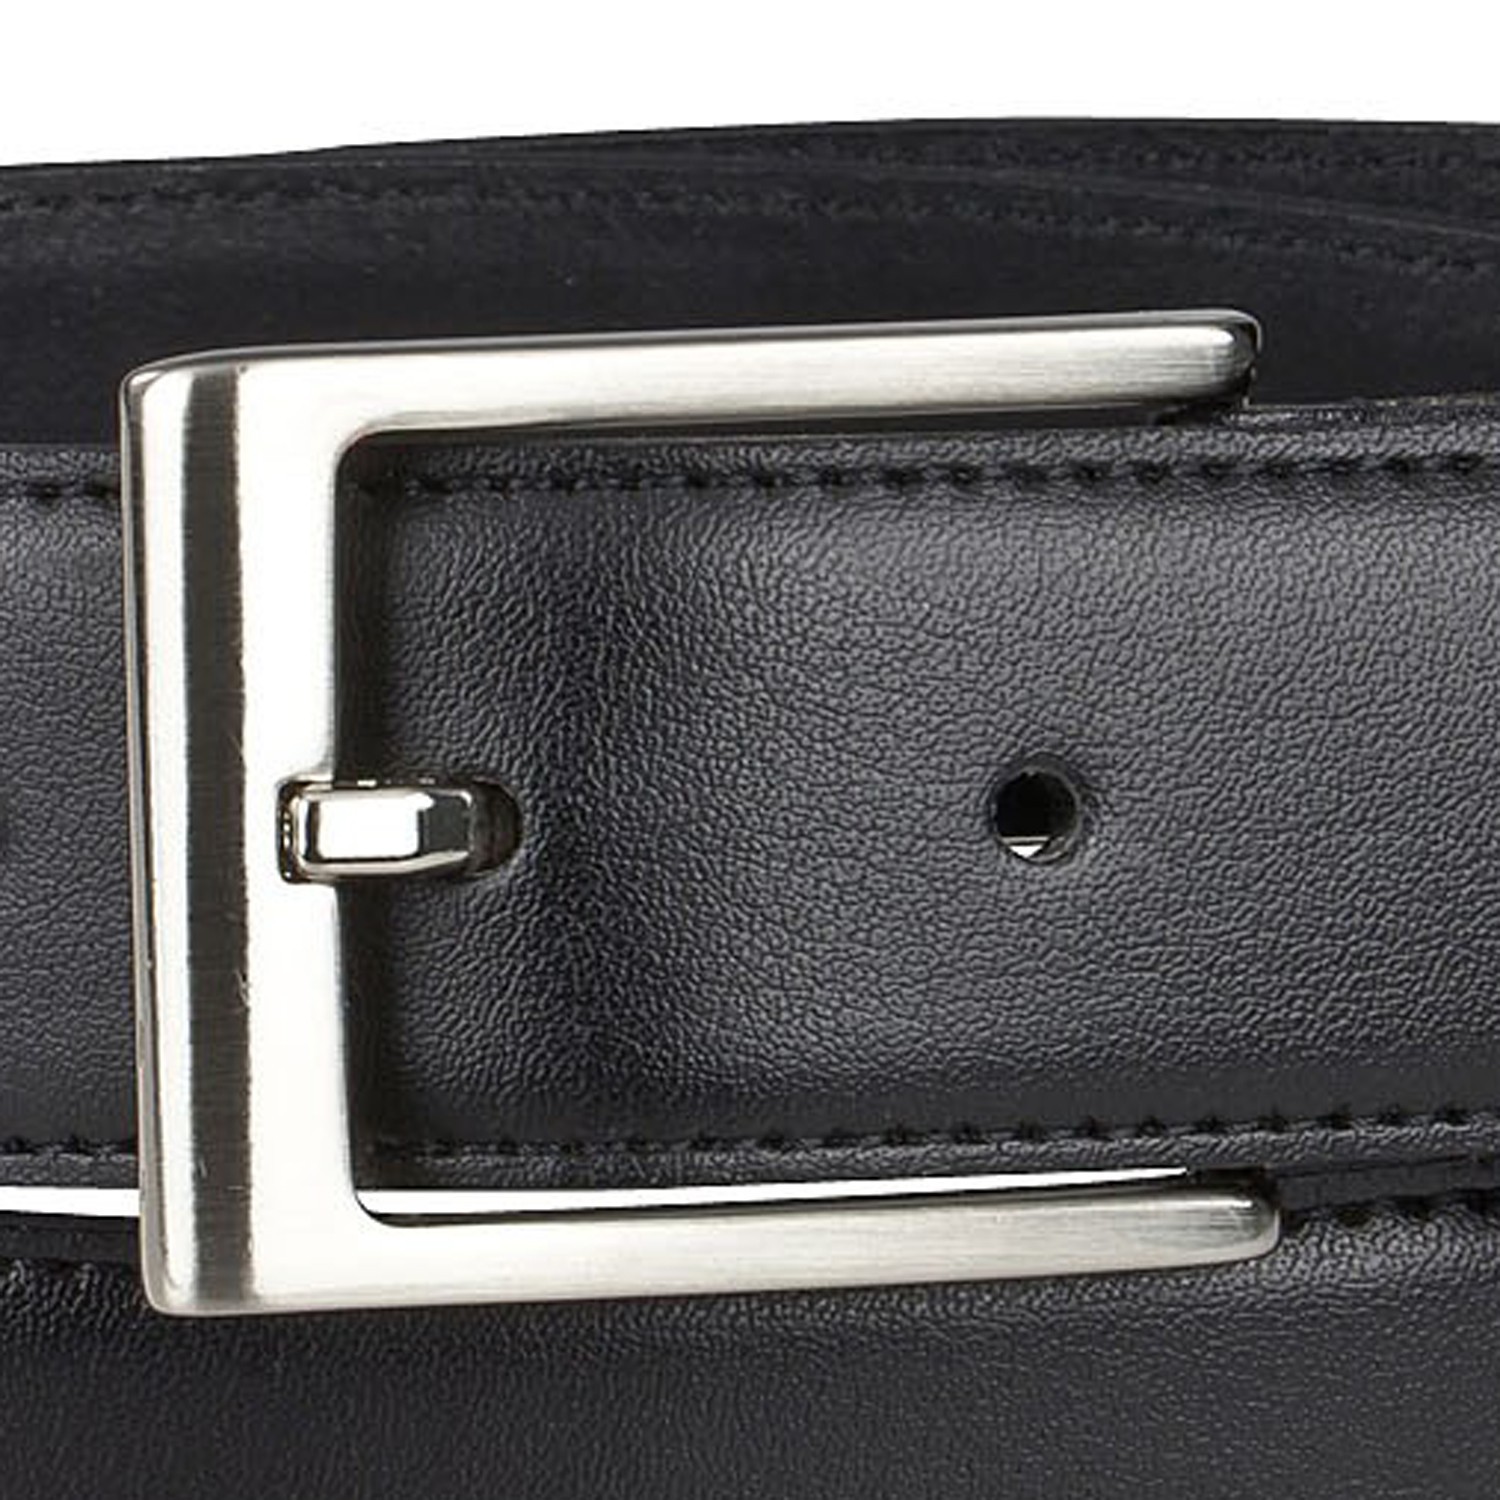 Black belt 35 mm (1.37 Inches) wide by Lindenmann in over lengths up to 150 cm